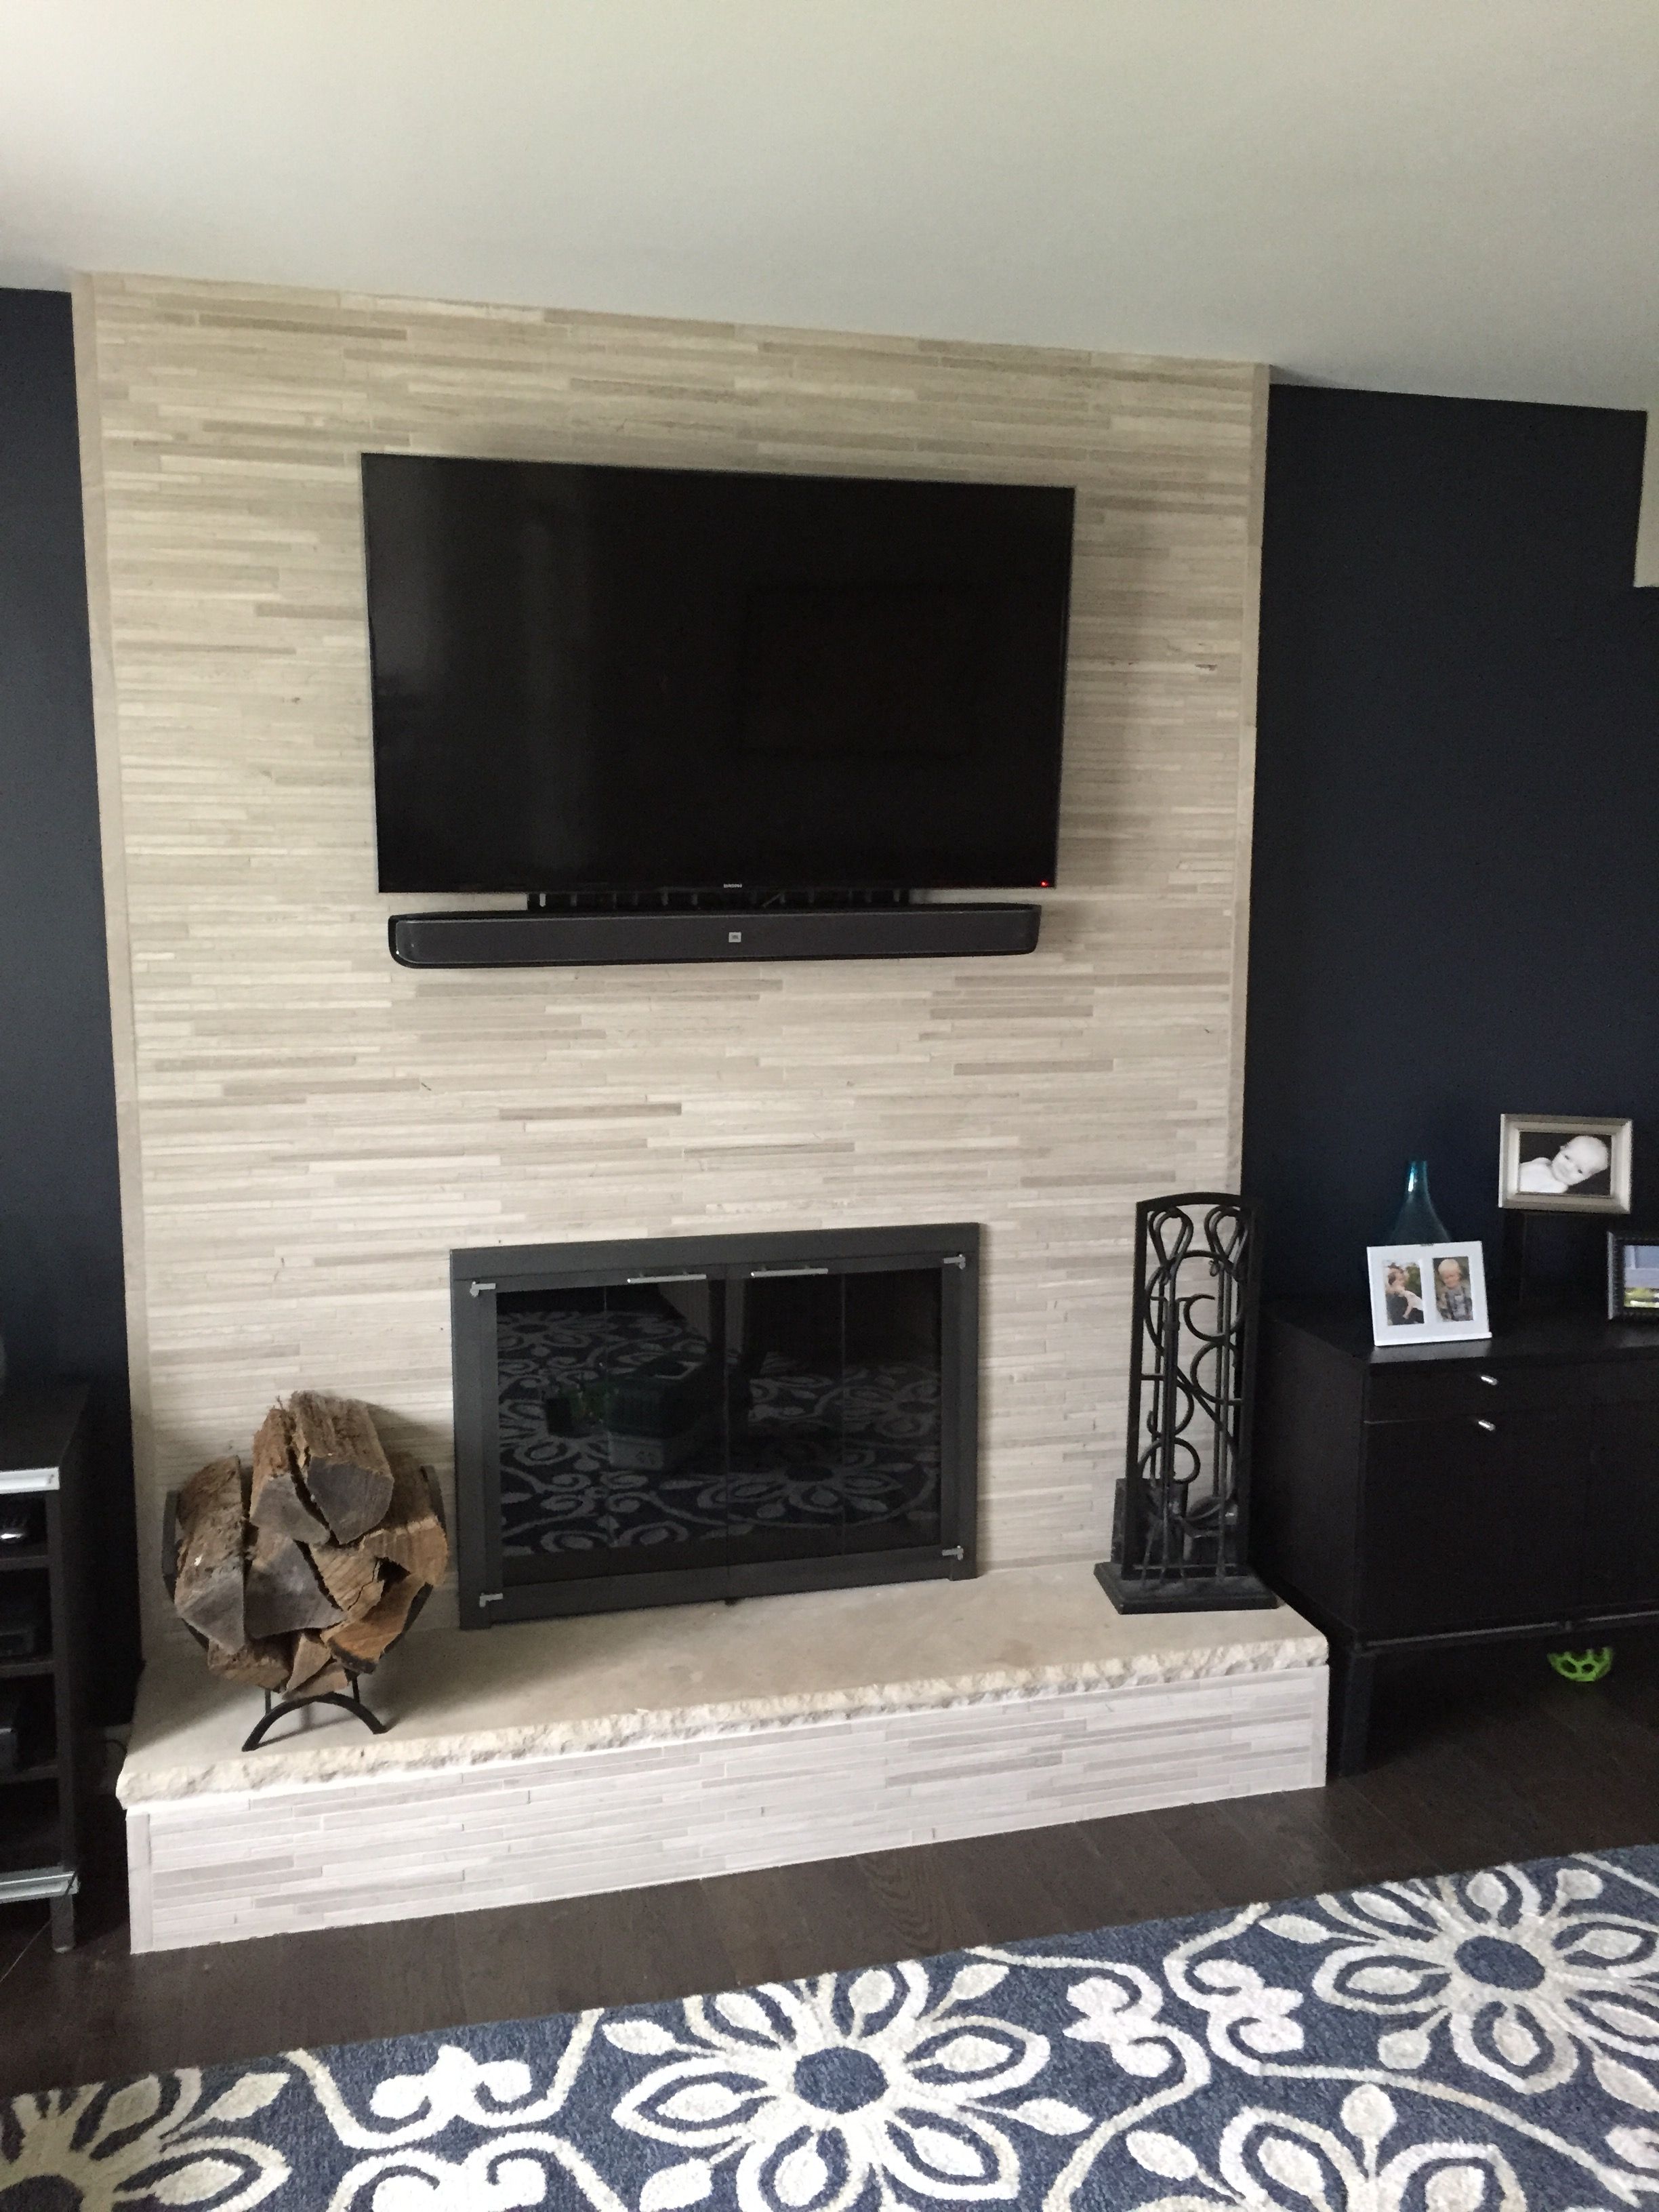 Fireplace Slab Stone Beautiful Our Old Fireplace Was 80 S 90 S Brick Veneer to Give It An